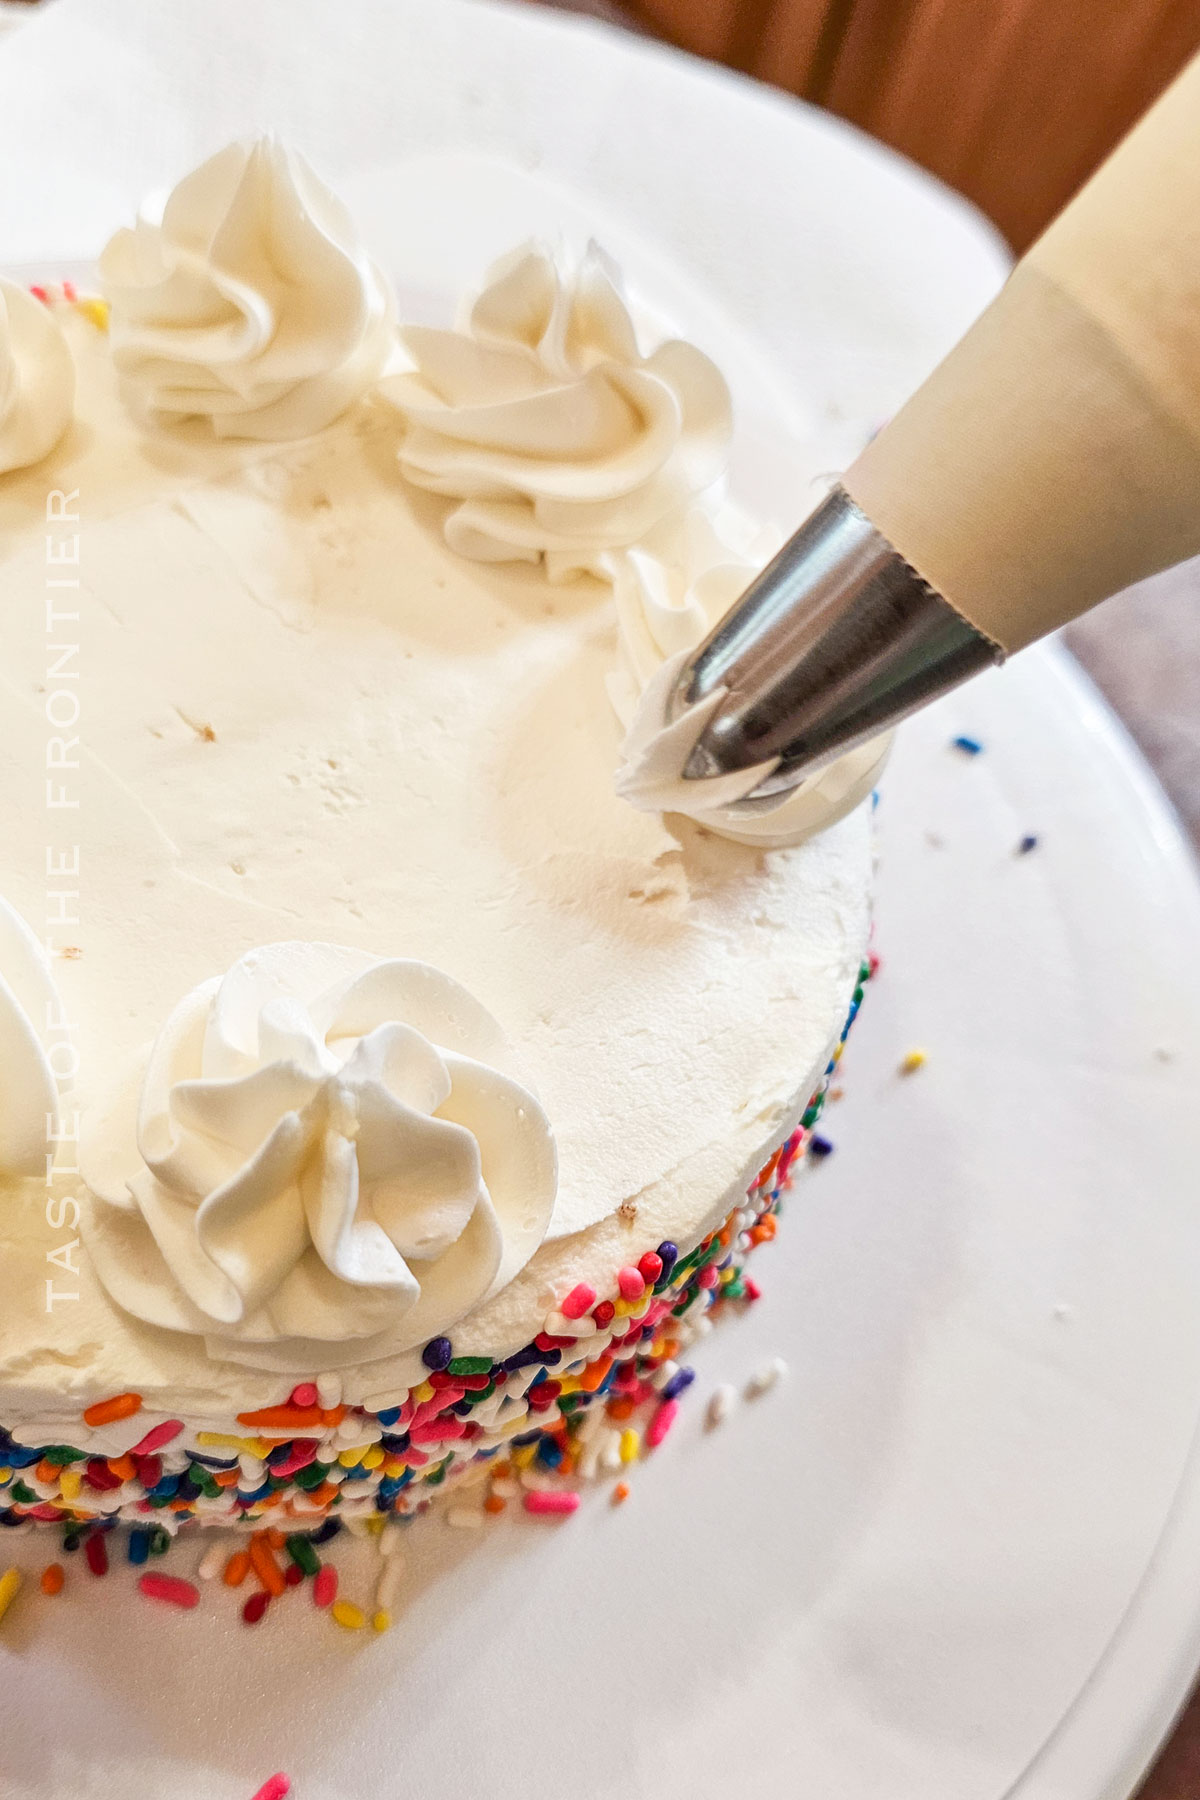 piping the frosting